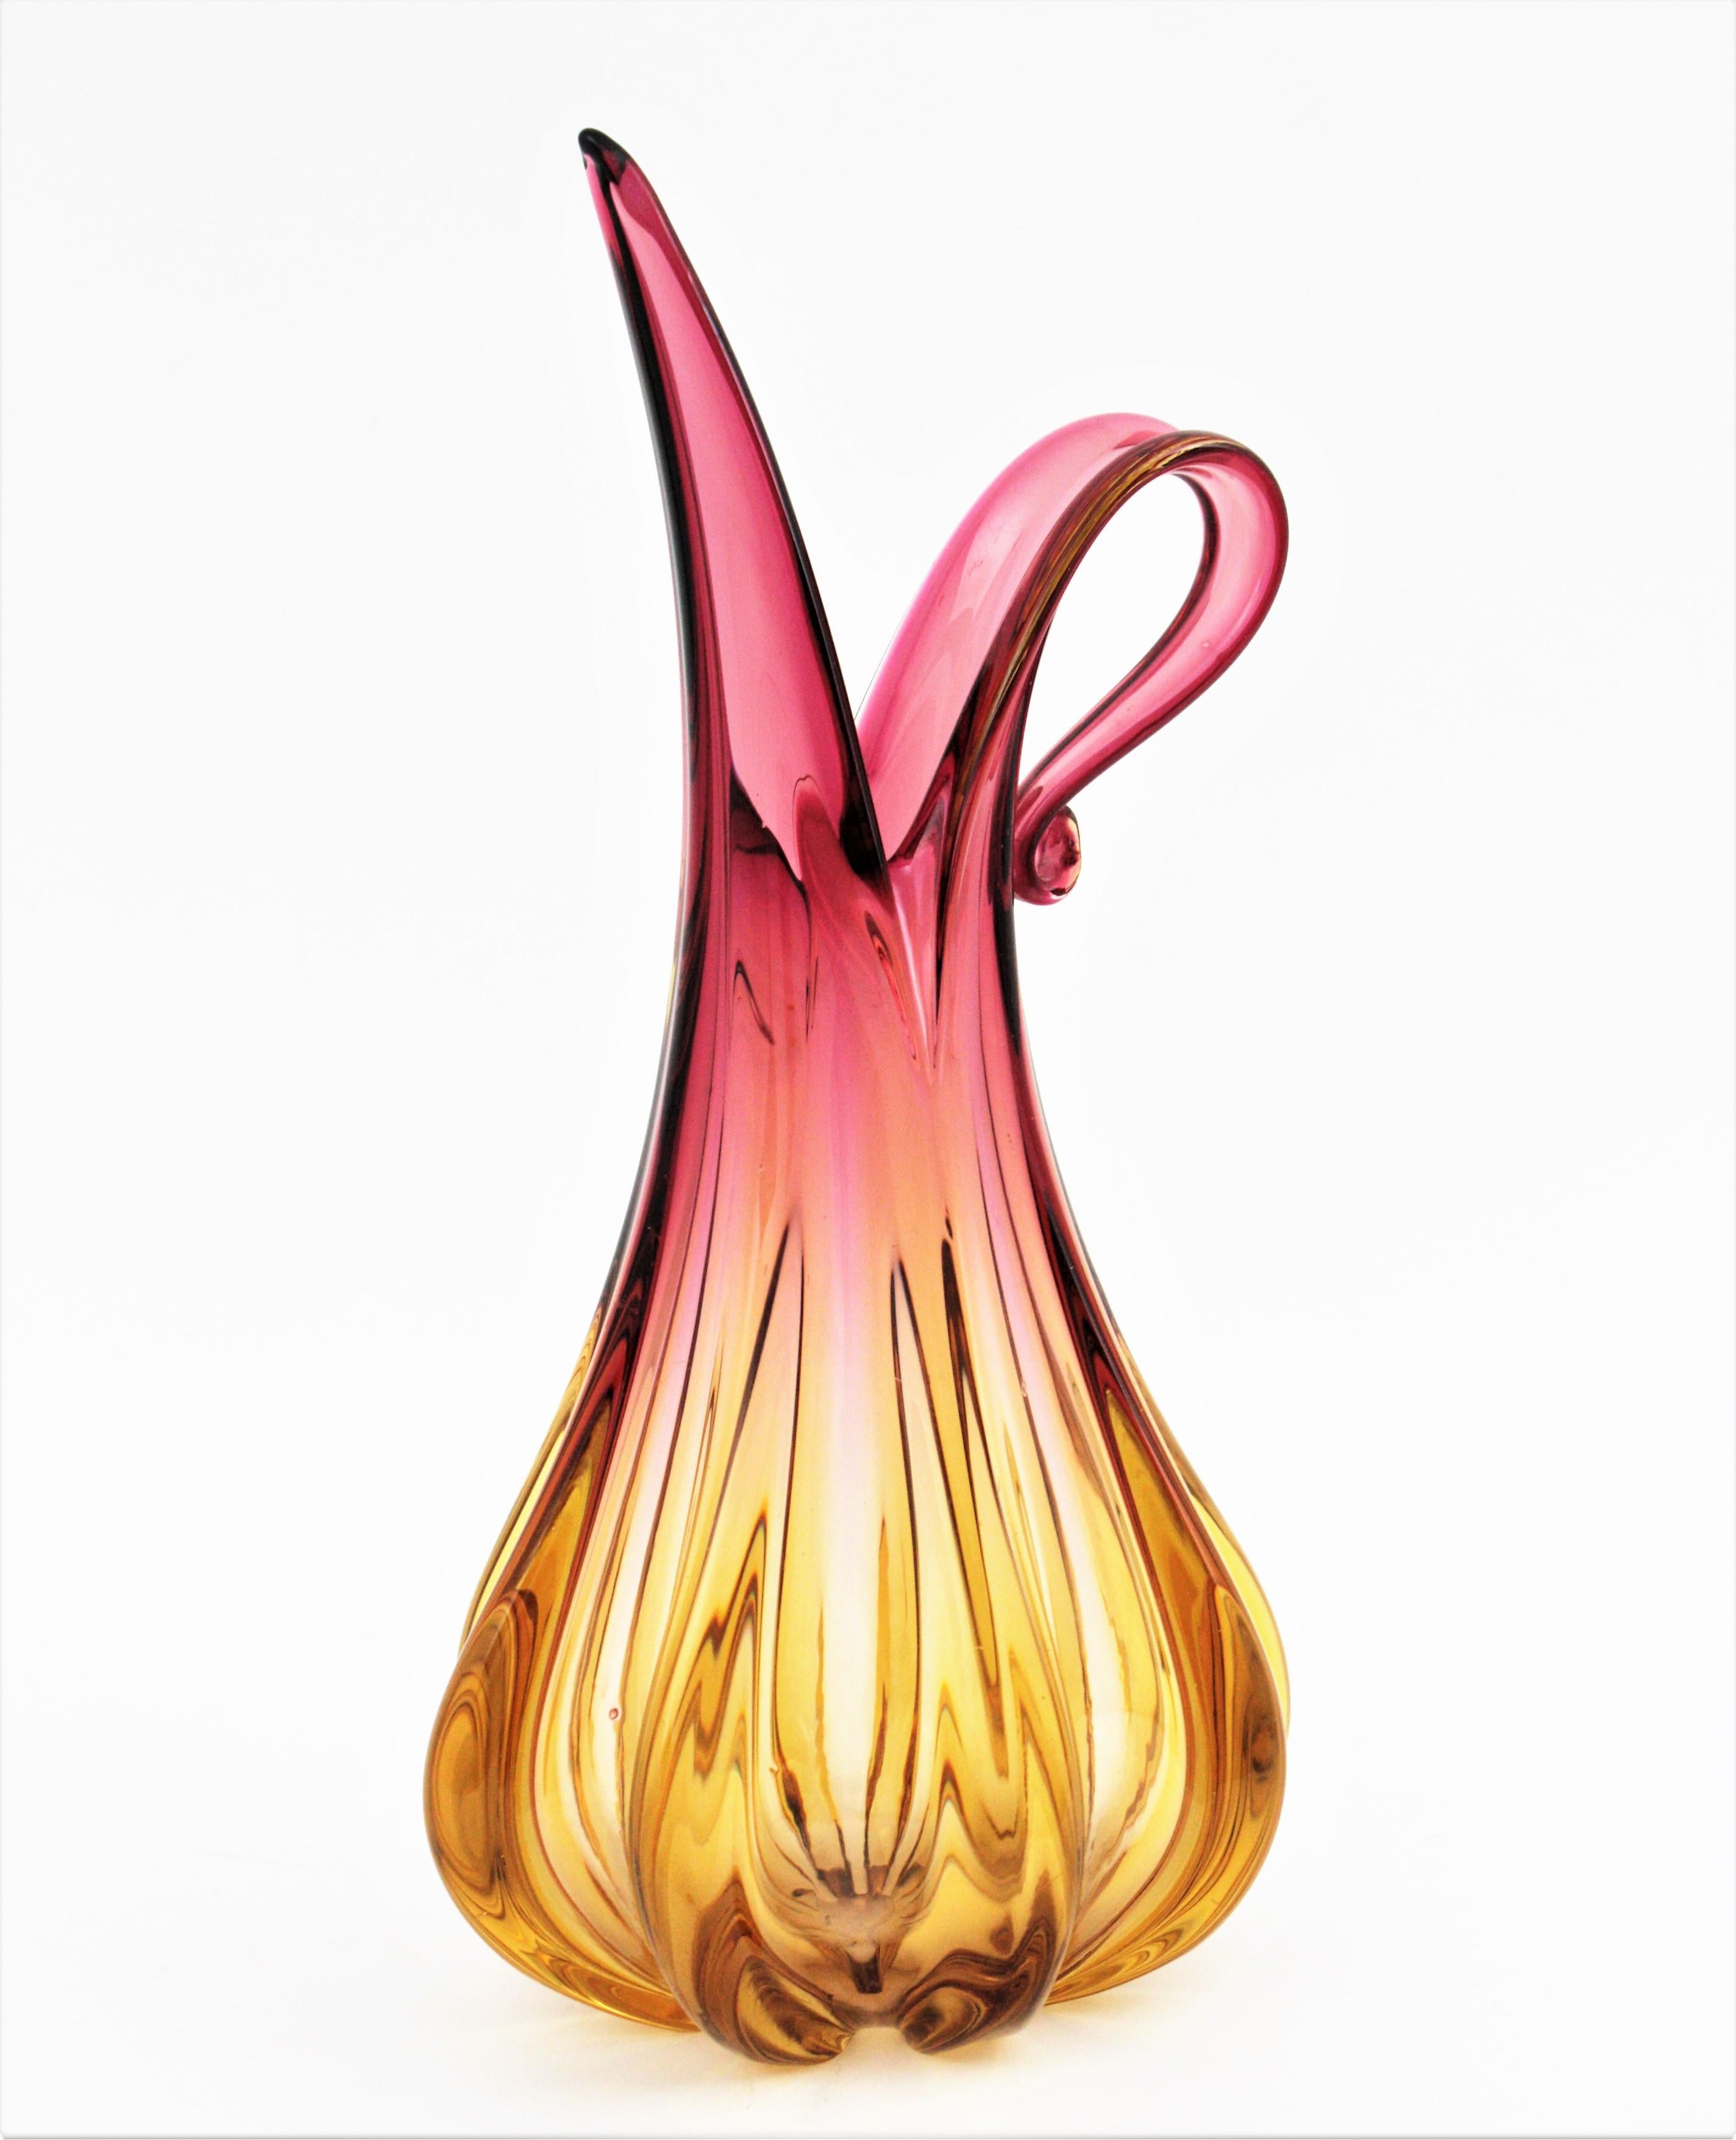 Sculptural Murano Jug Shaped Vase in Shades of Pink and Amber glass. Designed by Flavio Poli and manufactured by Seguso Vetri d'Arte. Italy, 1950s.
Large size.
Vibrant colors in a gradient of shades from pink to amber yellow glass using the